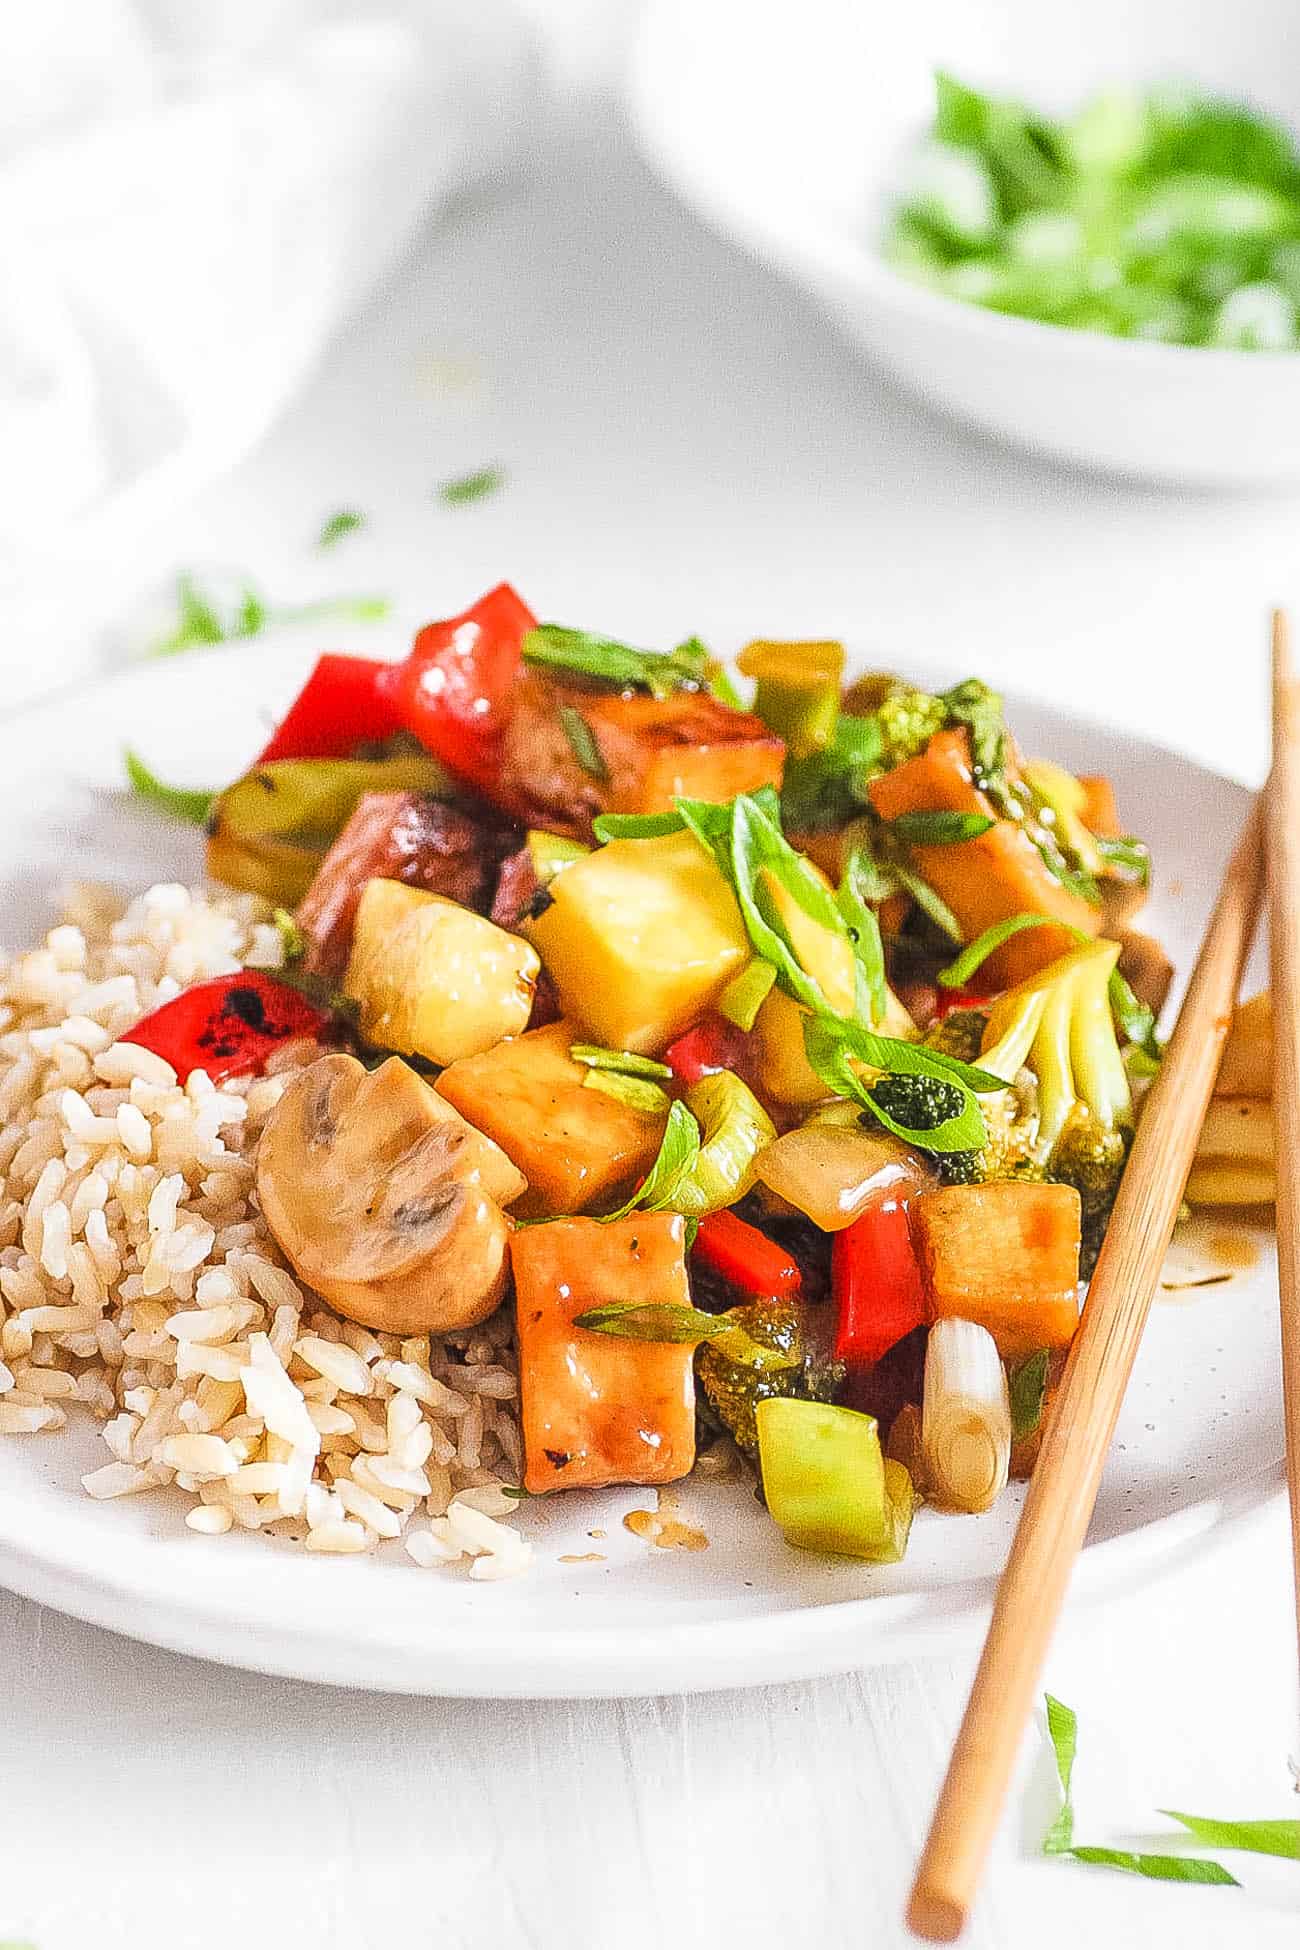 sweet and sour tofu with veggies, served on a white plate with c،psticks